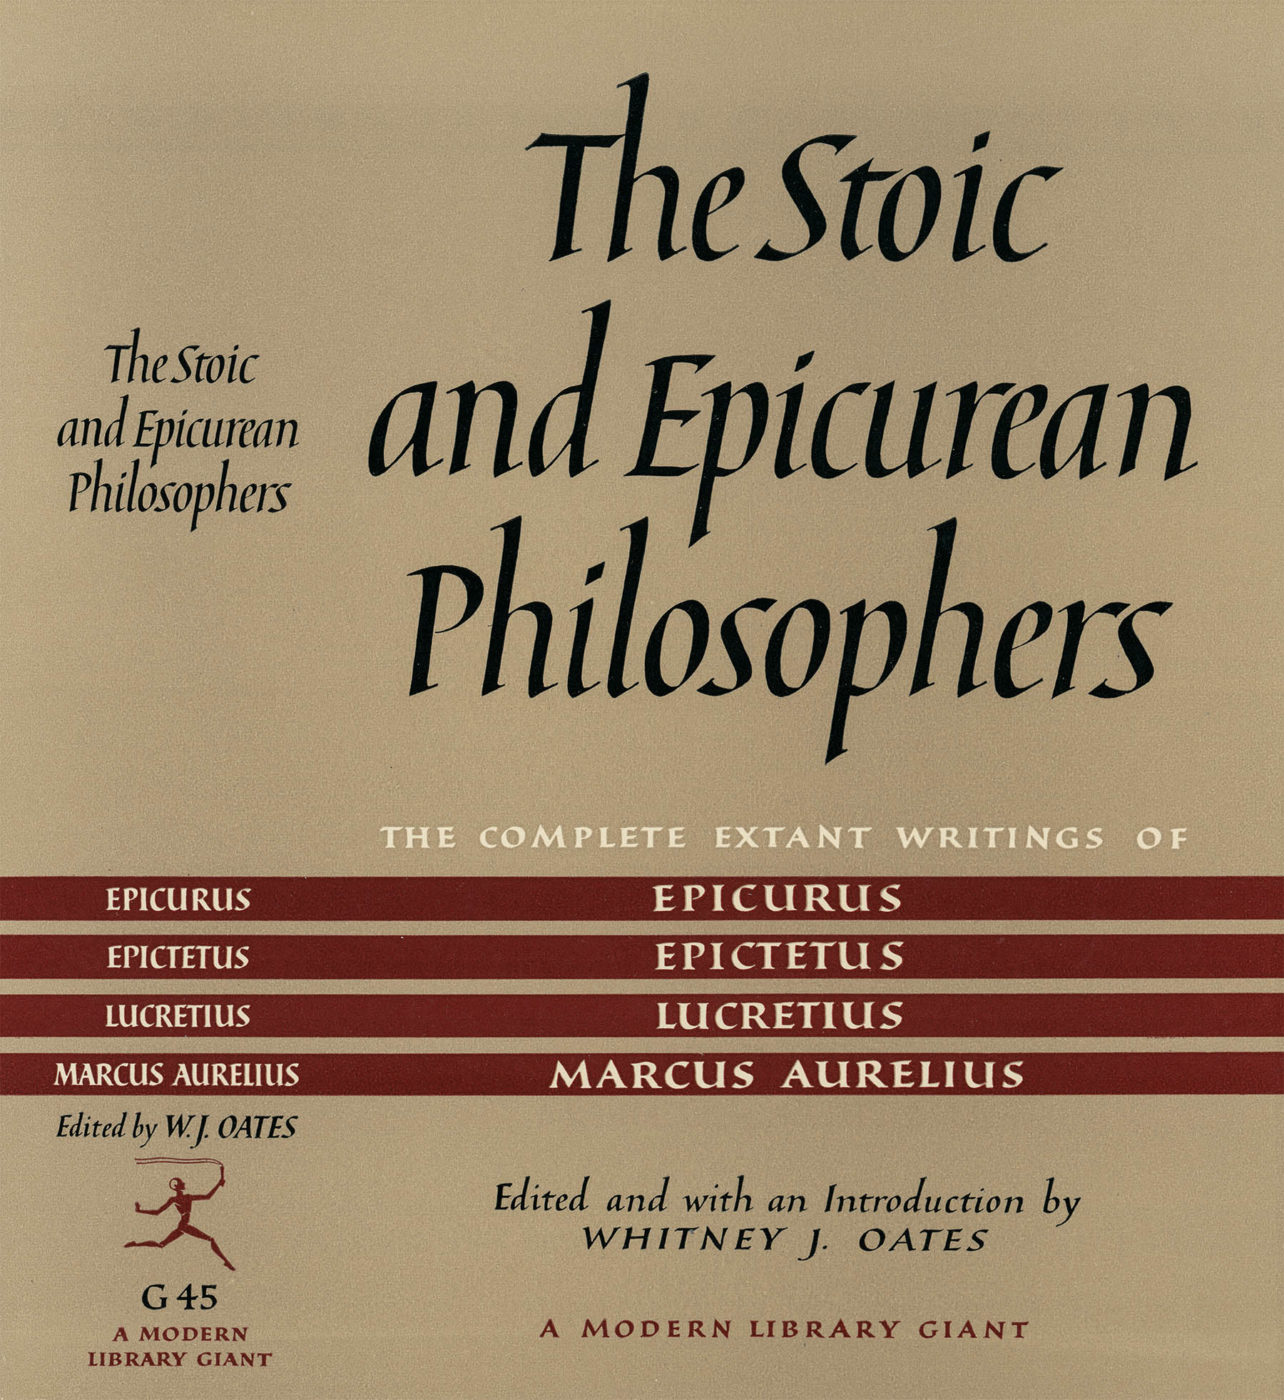 Book jacket of The Stoic and Epicurean Philosophers